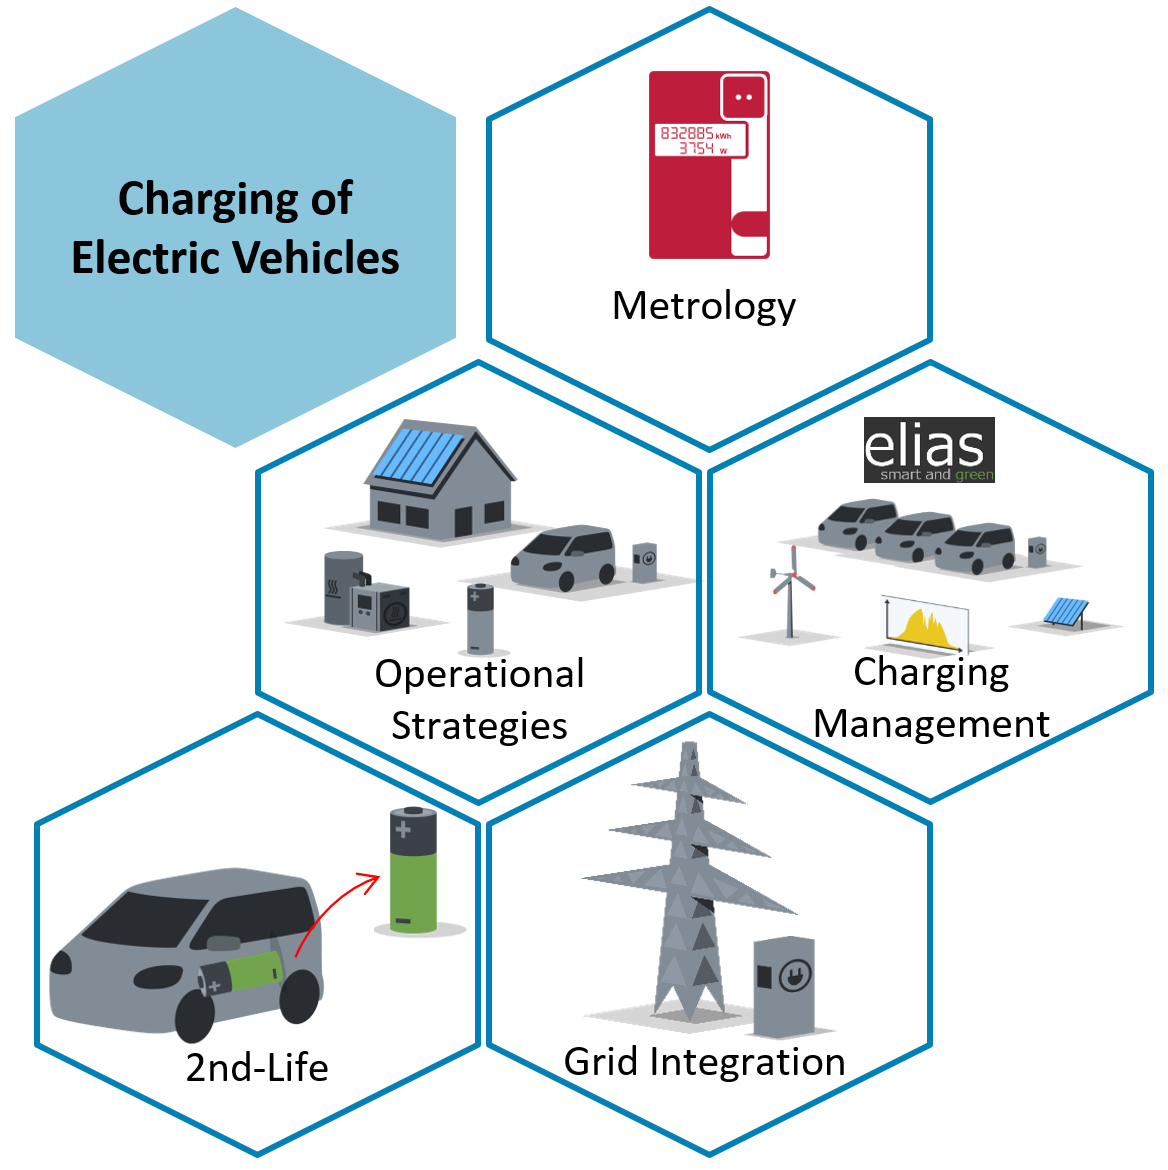 Charging of electric vehicles